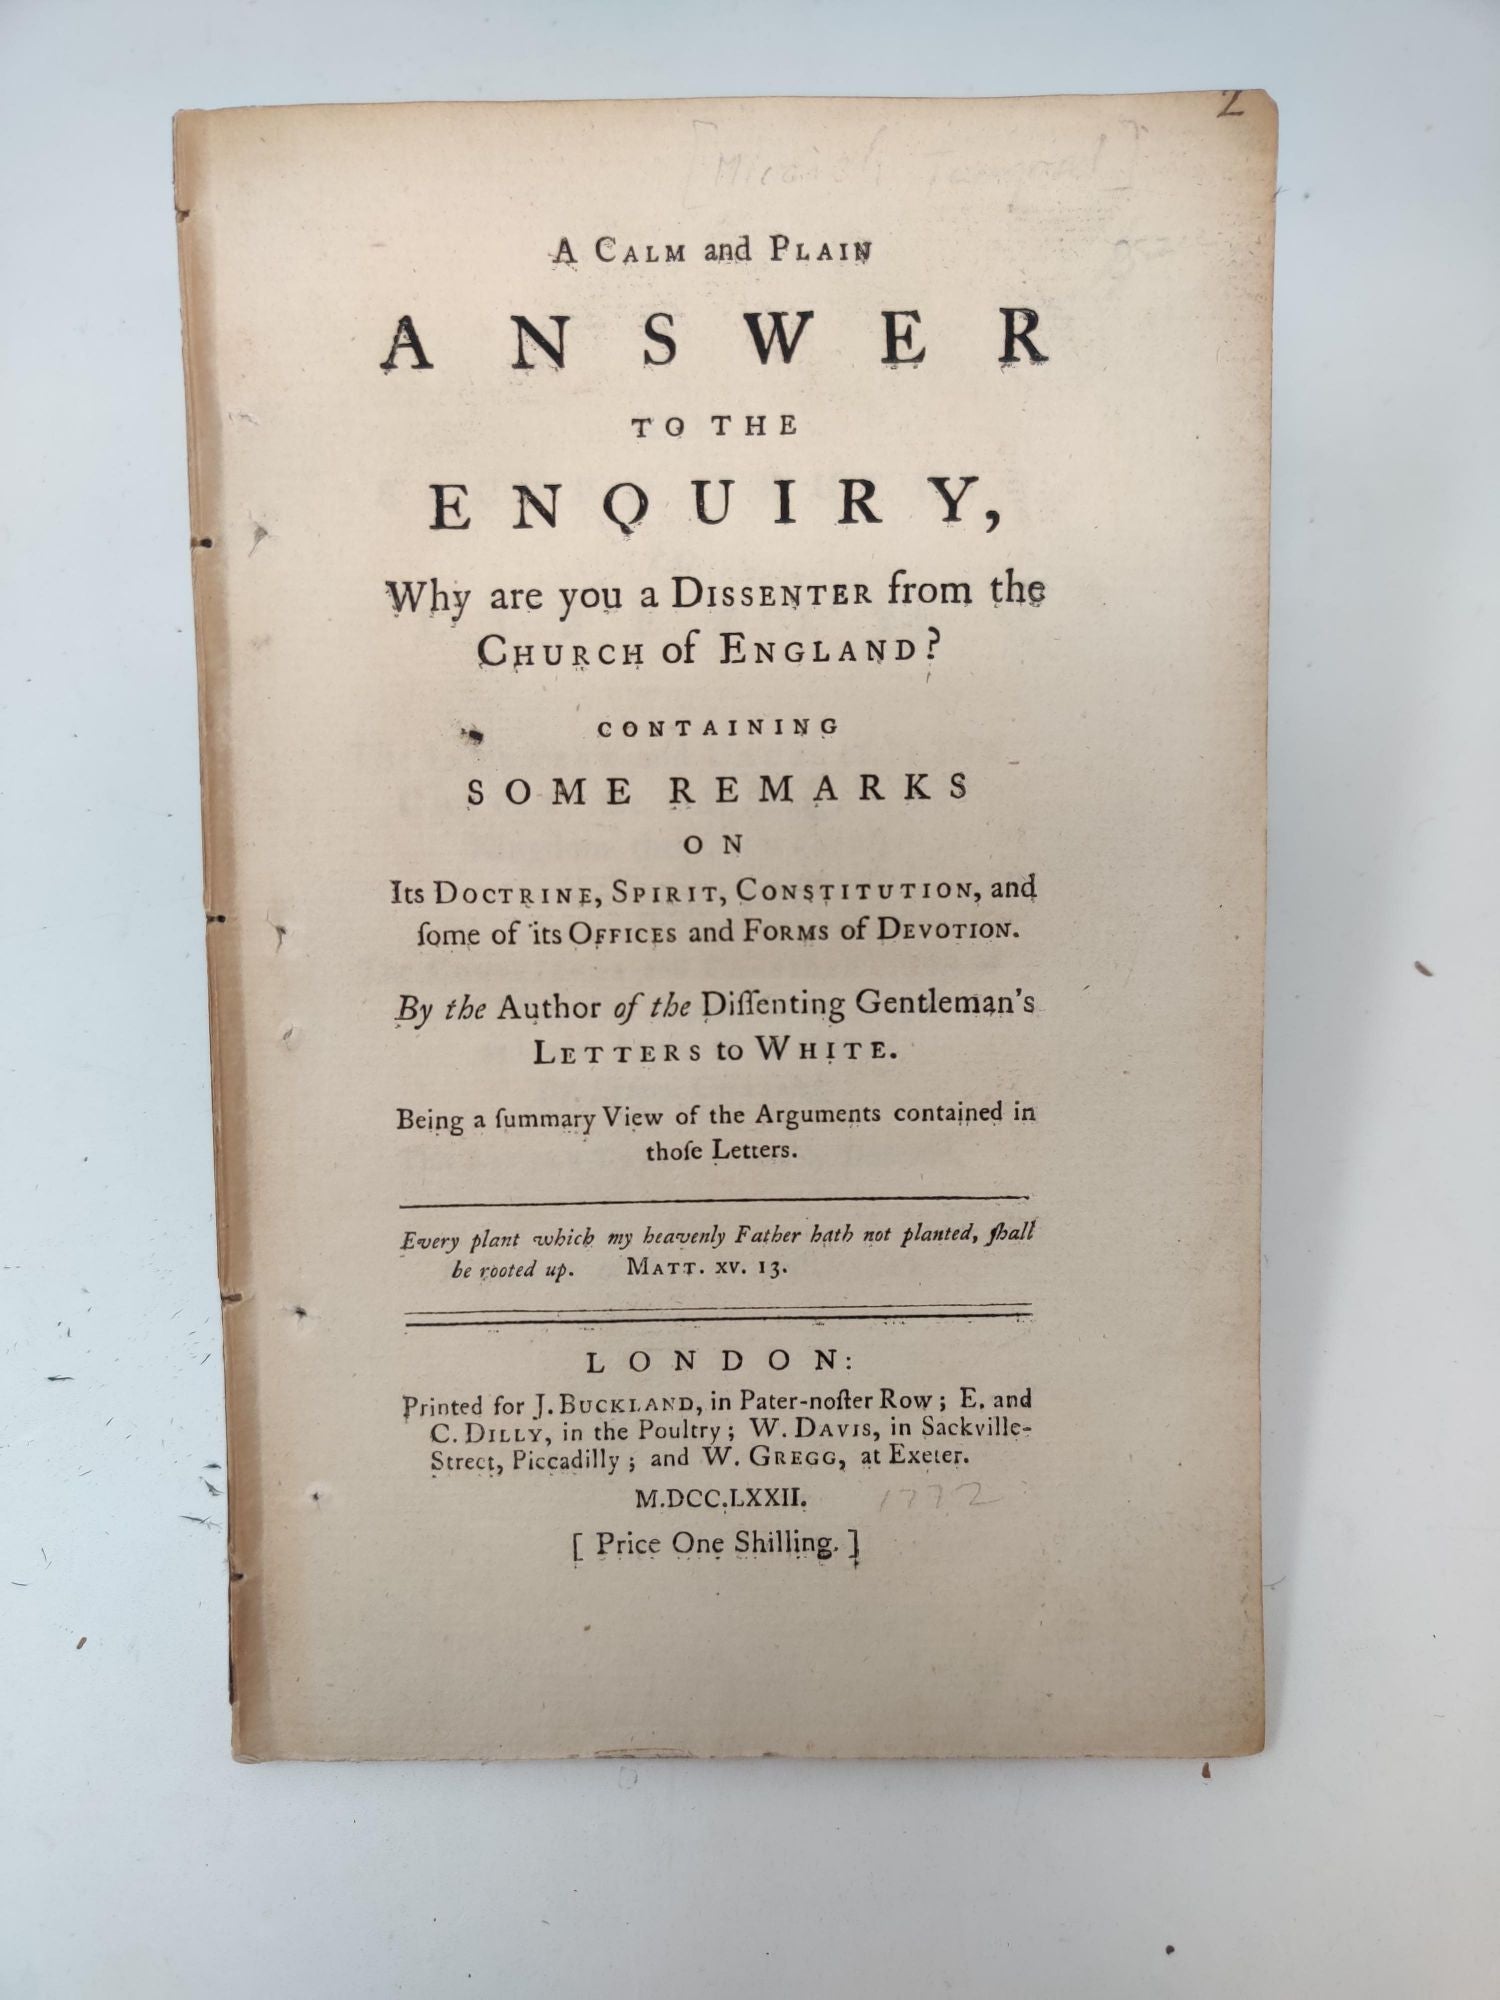 Towgood, Micaiah - A Calm and Plain Answer to the Enquiry, Why Are You a Dissenter from the Church of England? Containing Some Remarks on Its Doctrine, Spirit Constitution, and Some of Its Offices and Forms of Devotion. By the Author of the Dissenting Gentleman's Letters to White. Being a Summary View of the Arguments Contained in Those Letters